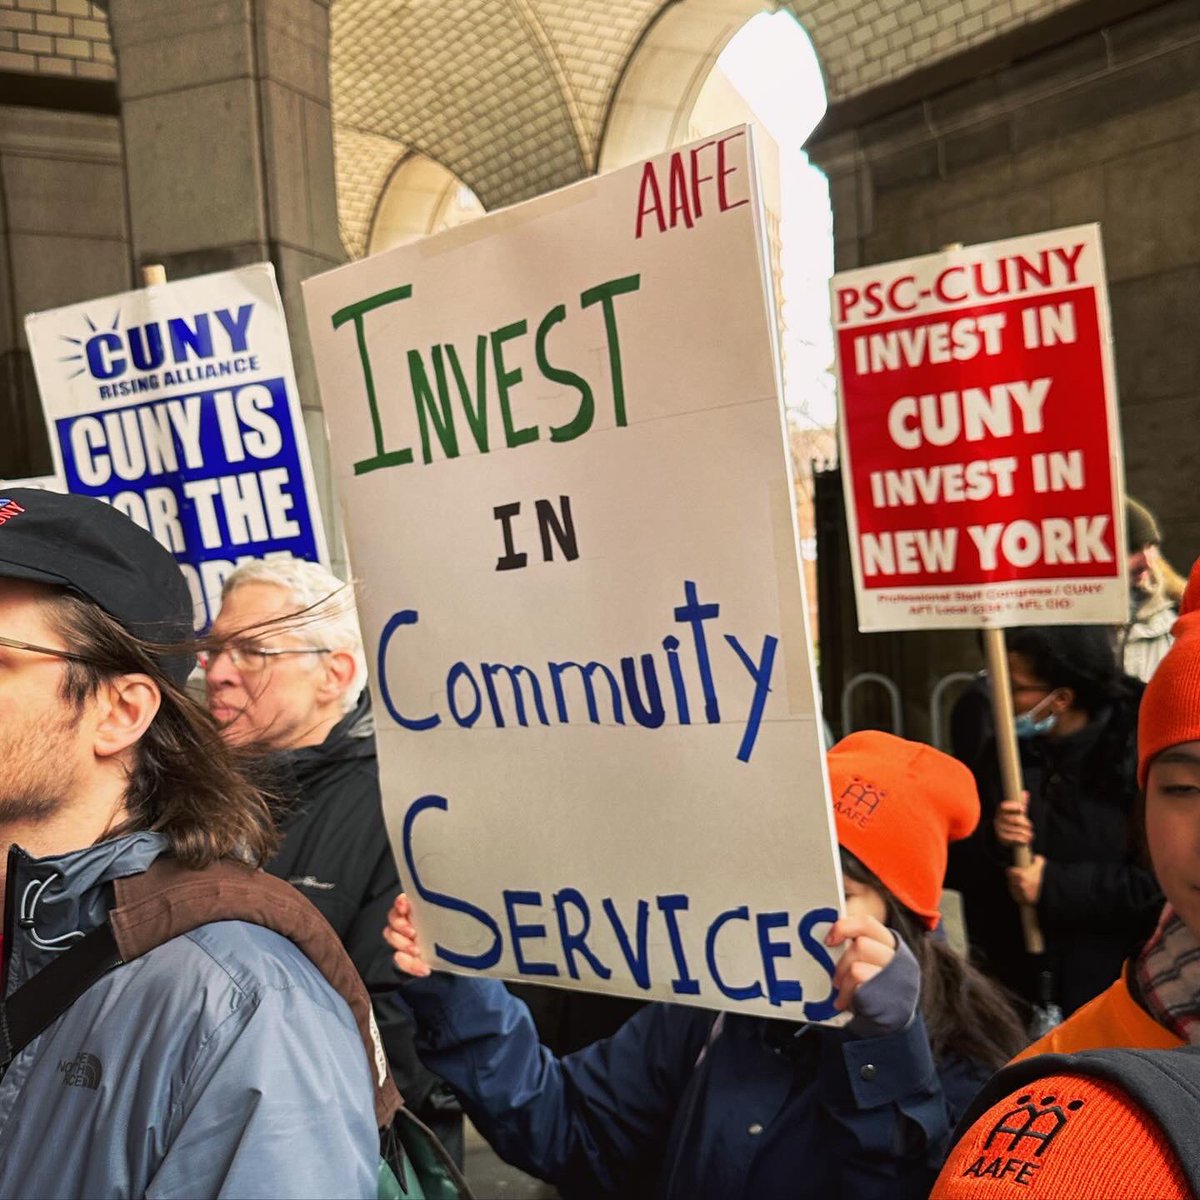 CUNY students and @psc_cuny  joined the rally against the @NYCMayor and the destructive budget cuts targeting the city’s most vital community services, education, composting, parks, libraries, childcare- everything that makes the city livable for working people ❤️‍🩹 #carenotcuts